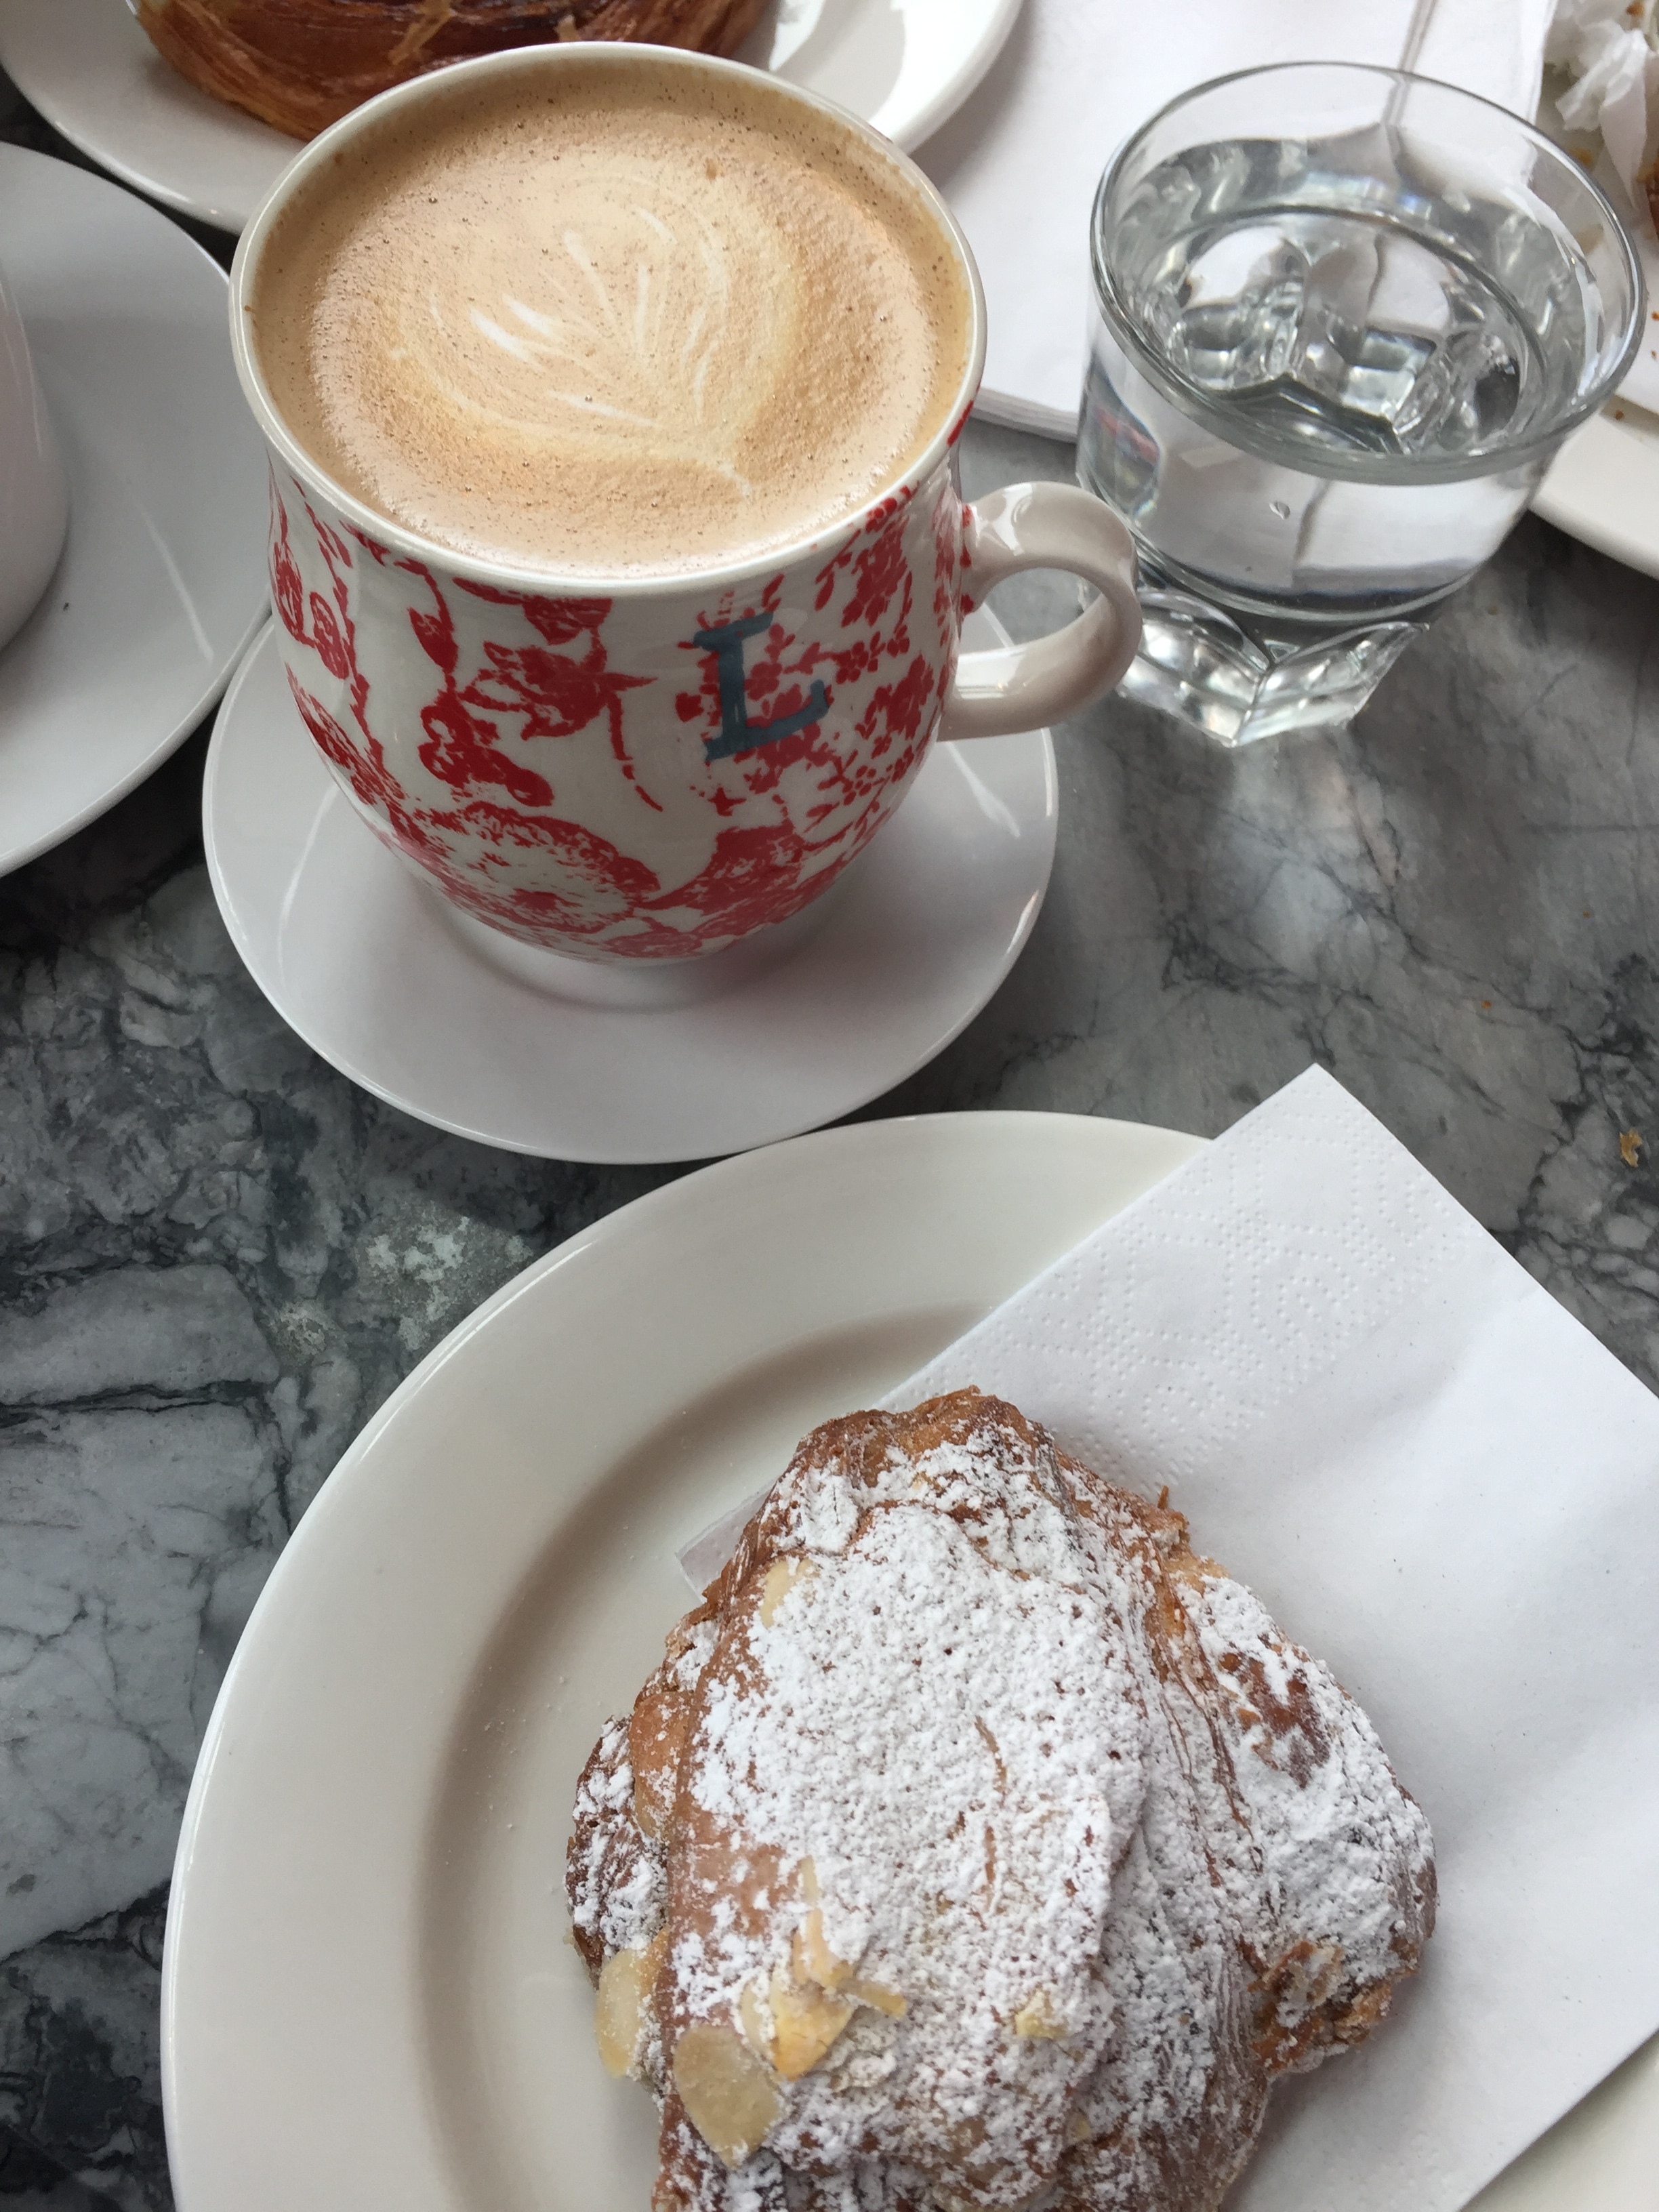 Latte and Almond Croissant